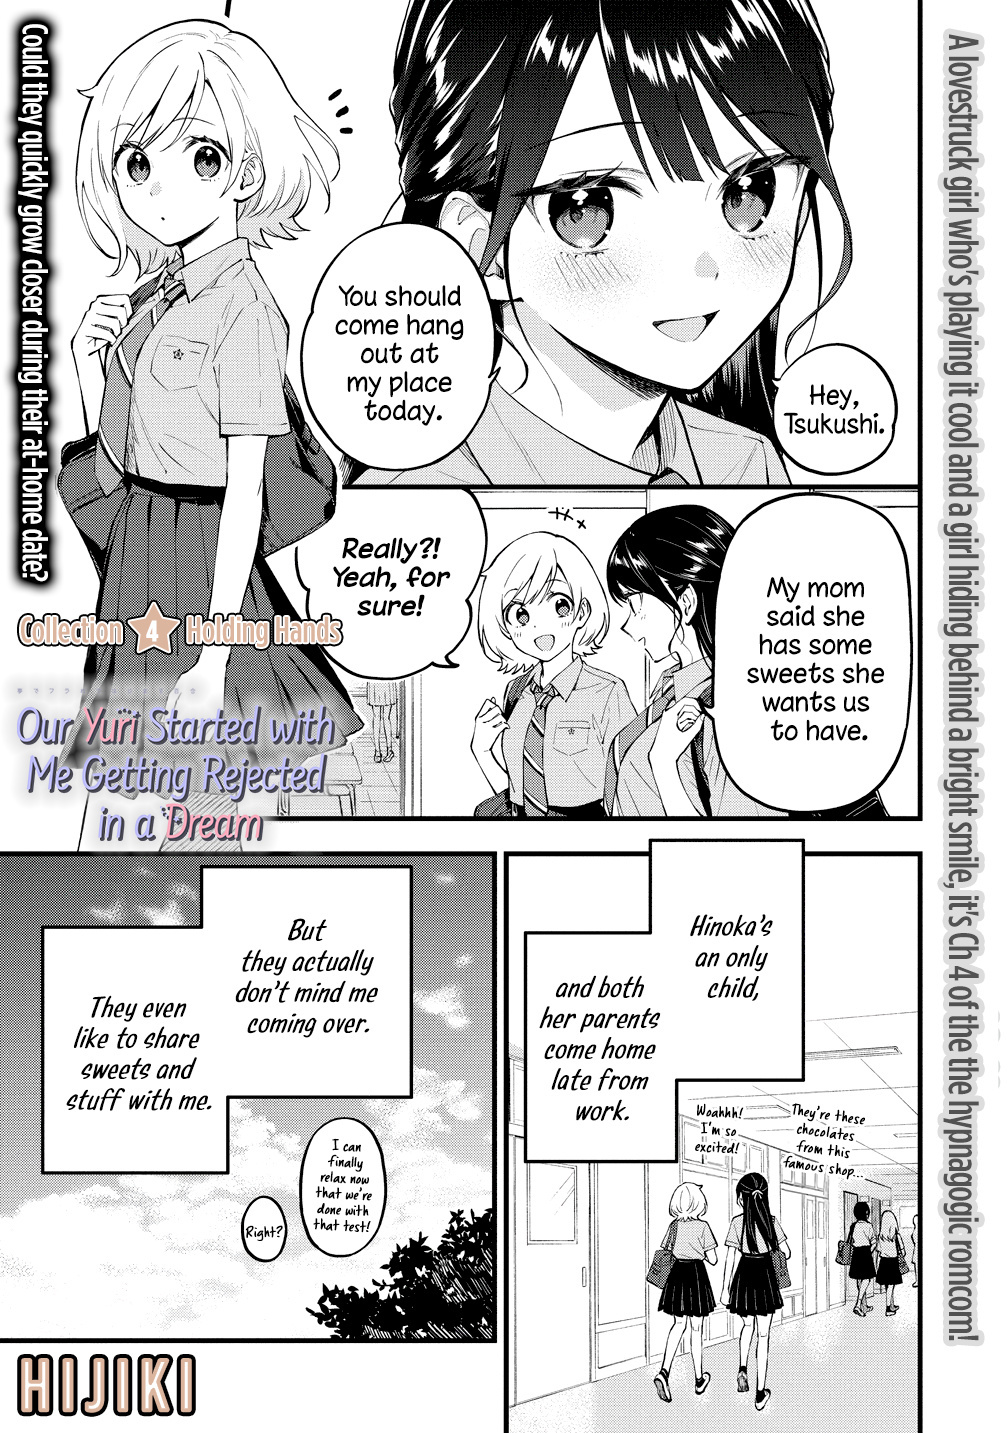 Our Yuri Started With Me Getting Rejected In A Dream - Page 1